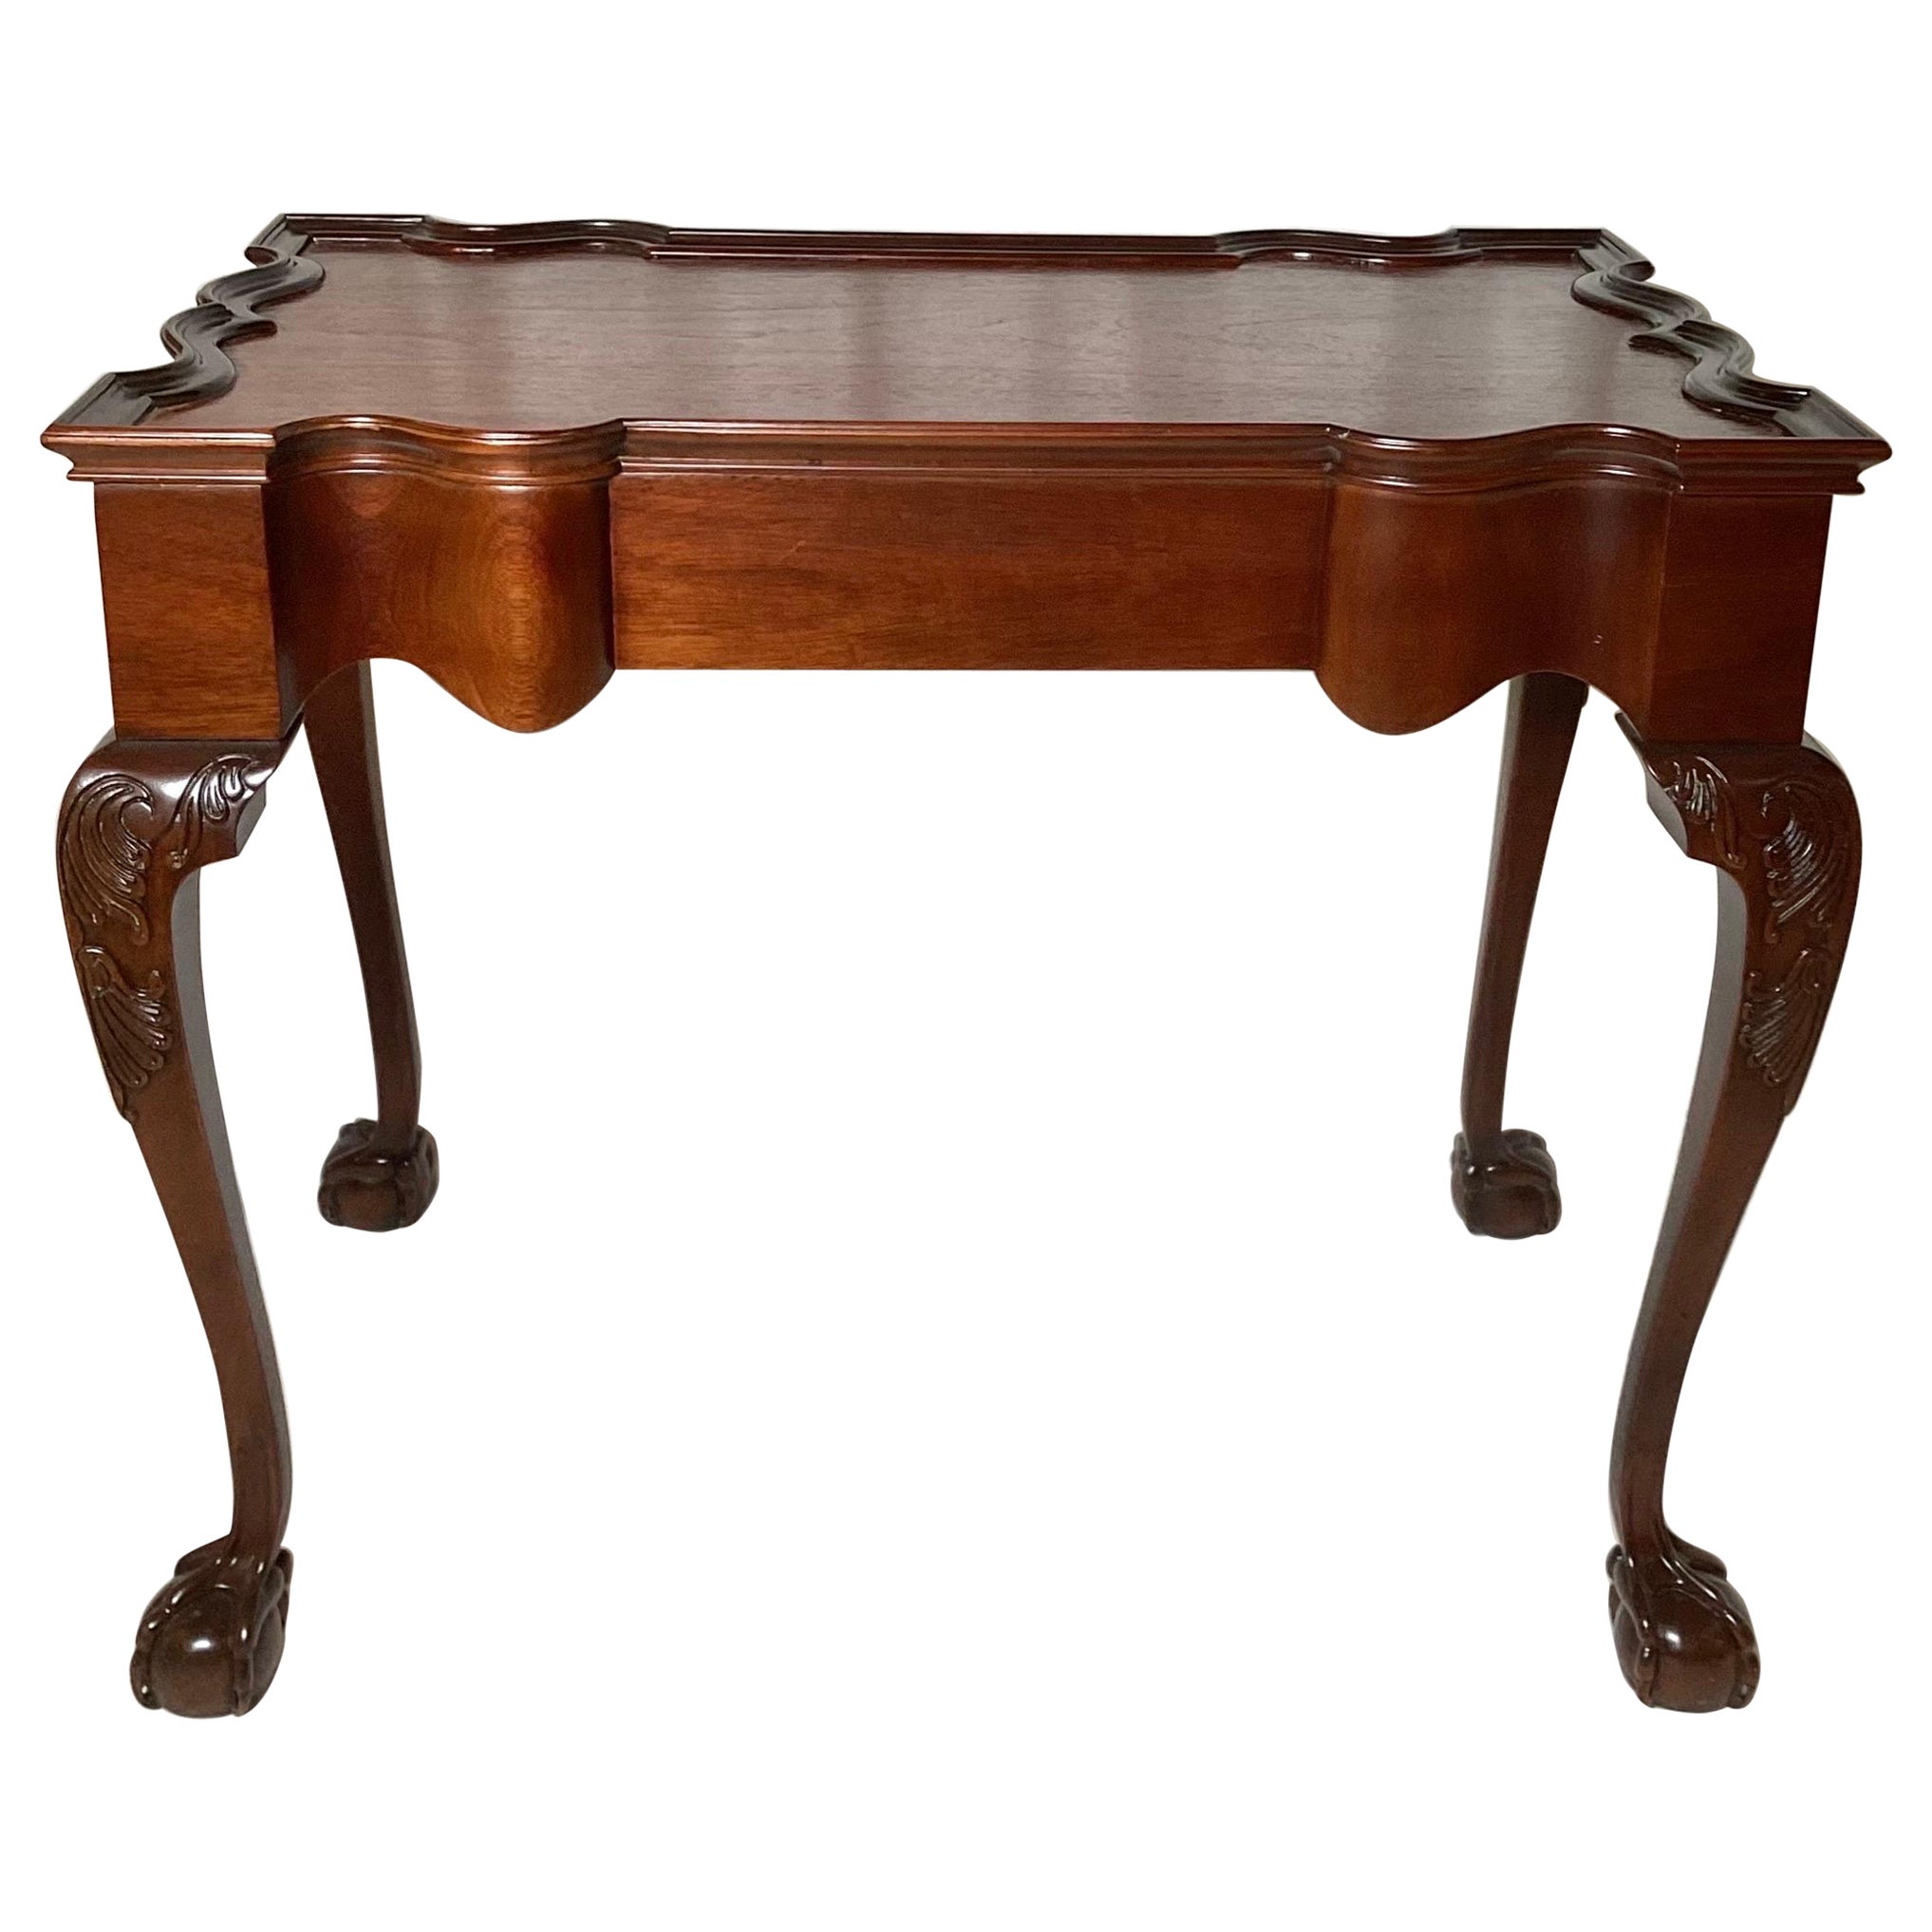 A Cabinet Maker Mahogany Table style from the John Goddard Table 